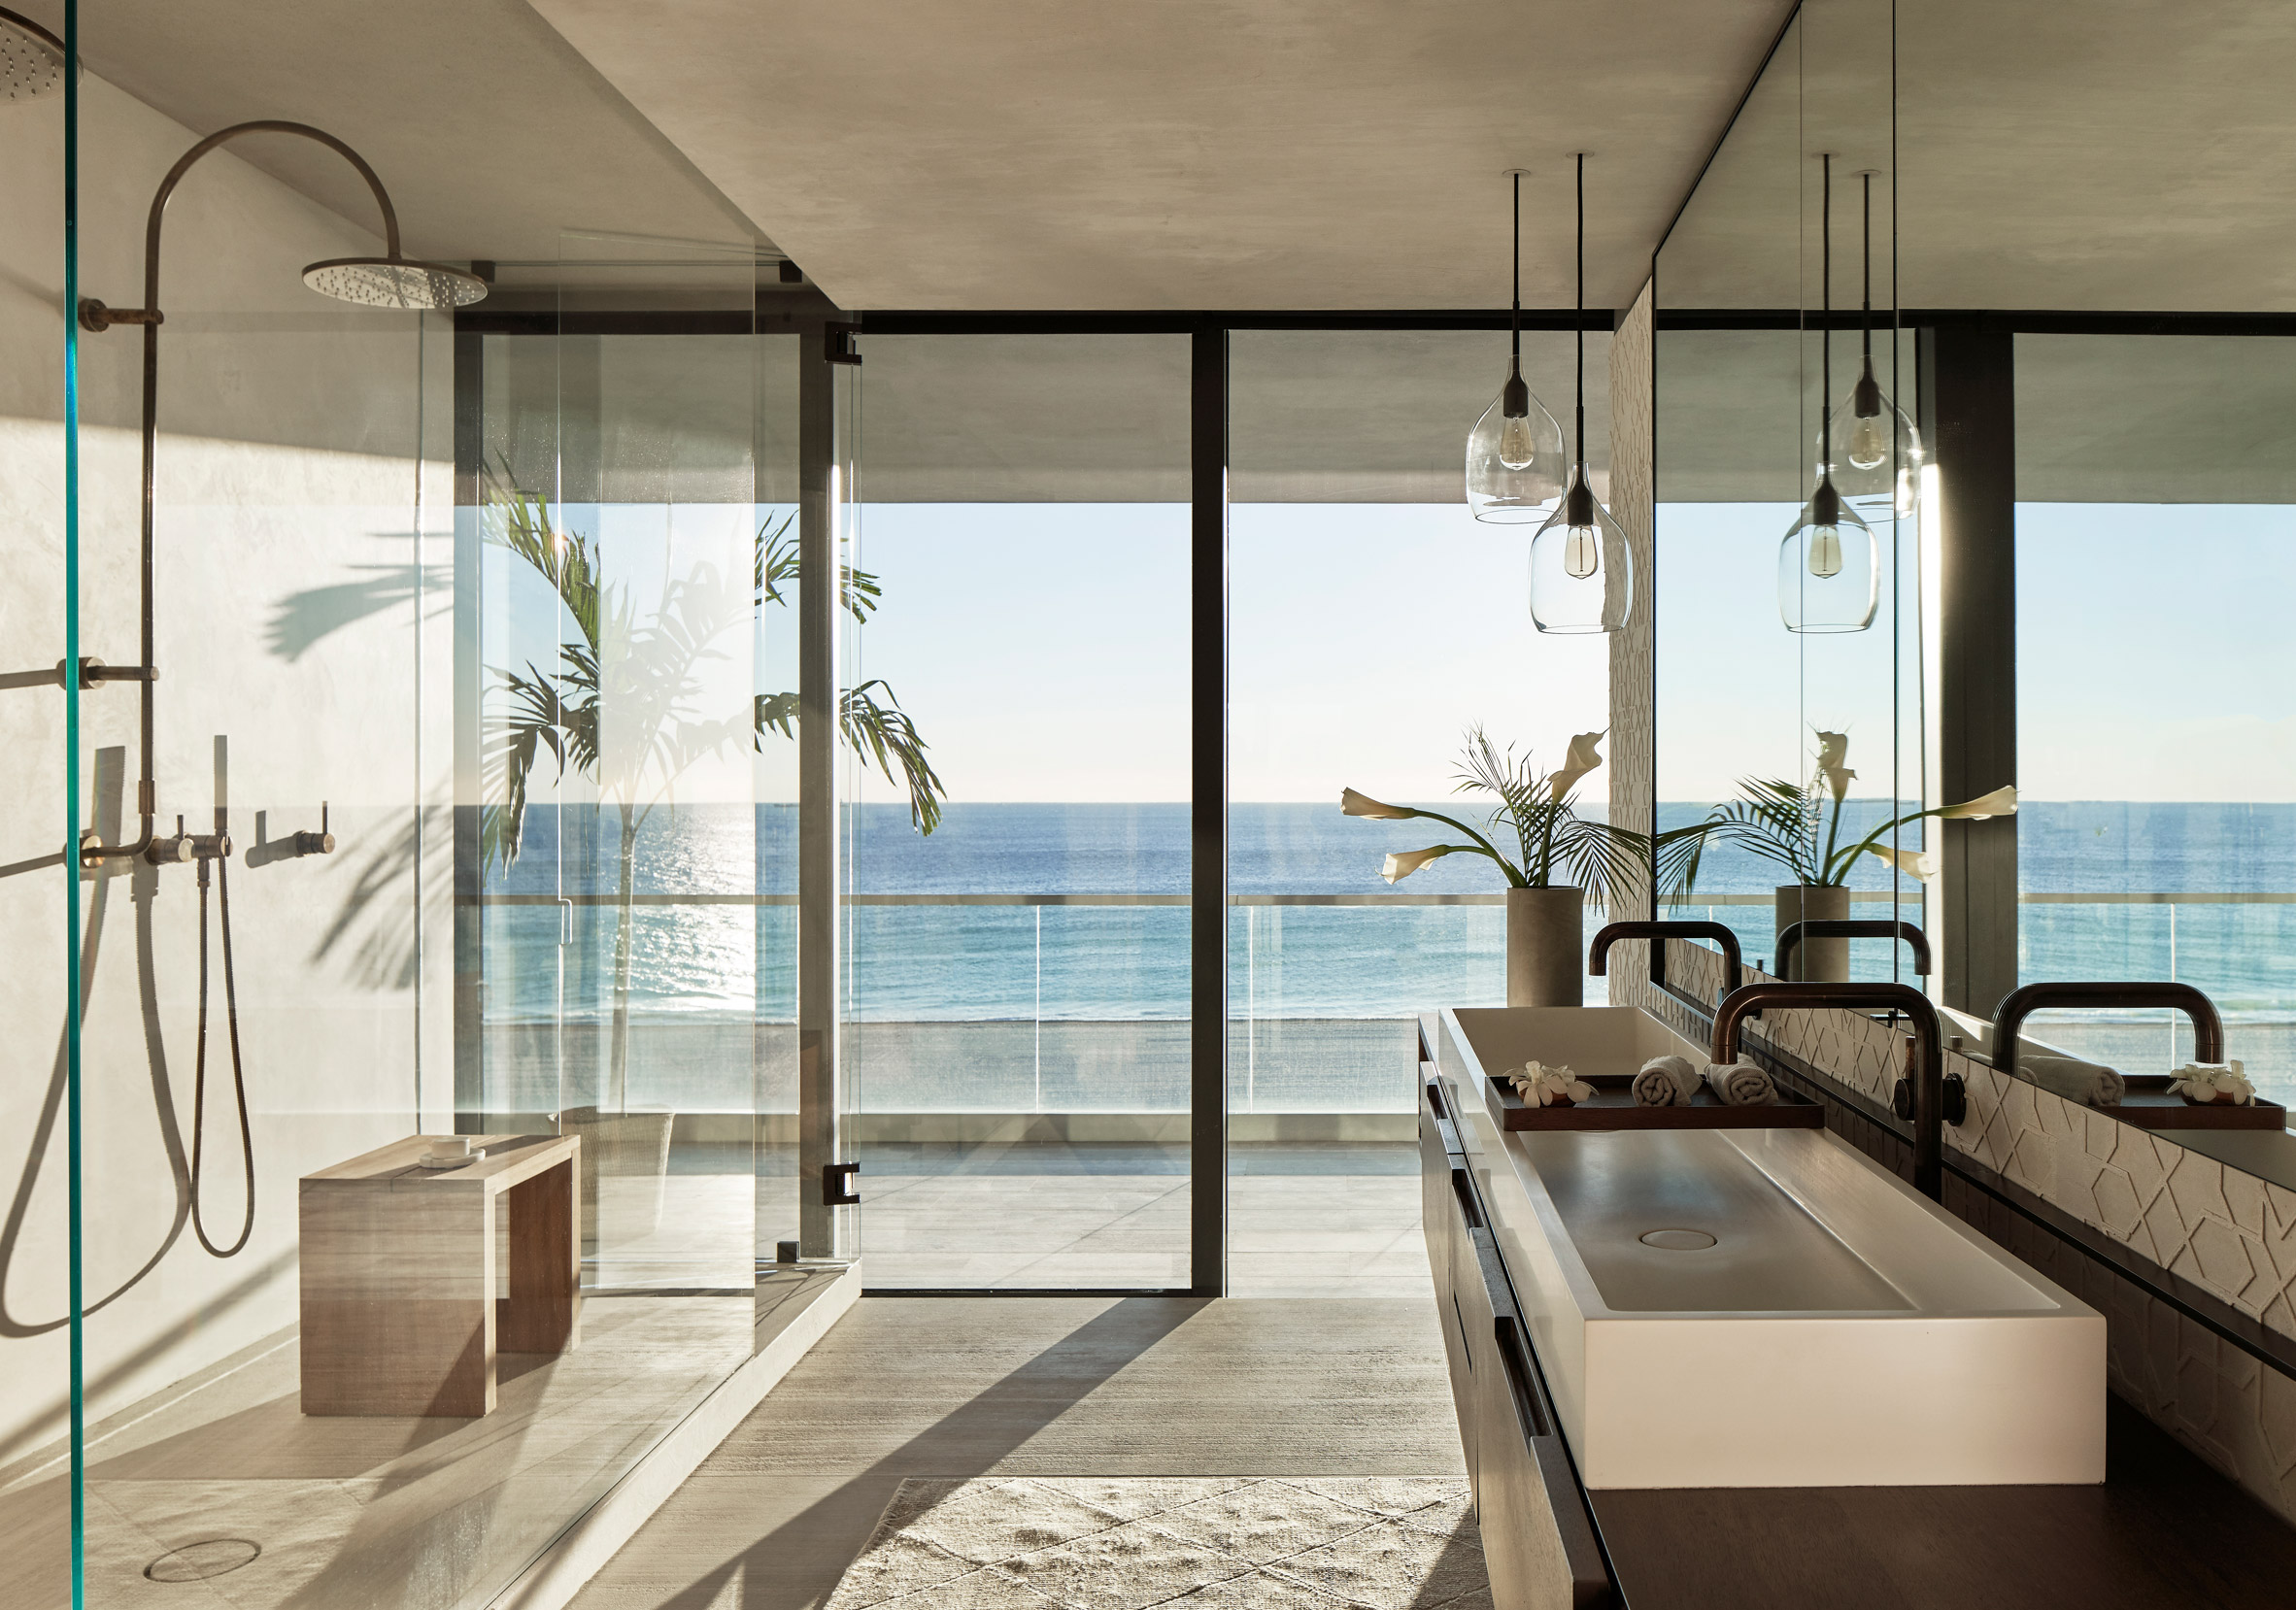 Bathroom of Ocean Drive apartment by MW Works in Miami, Florida